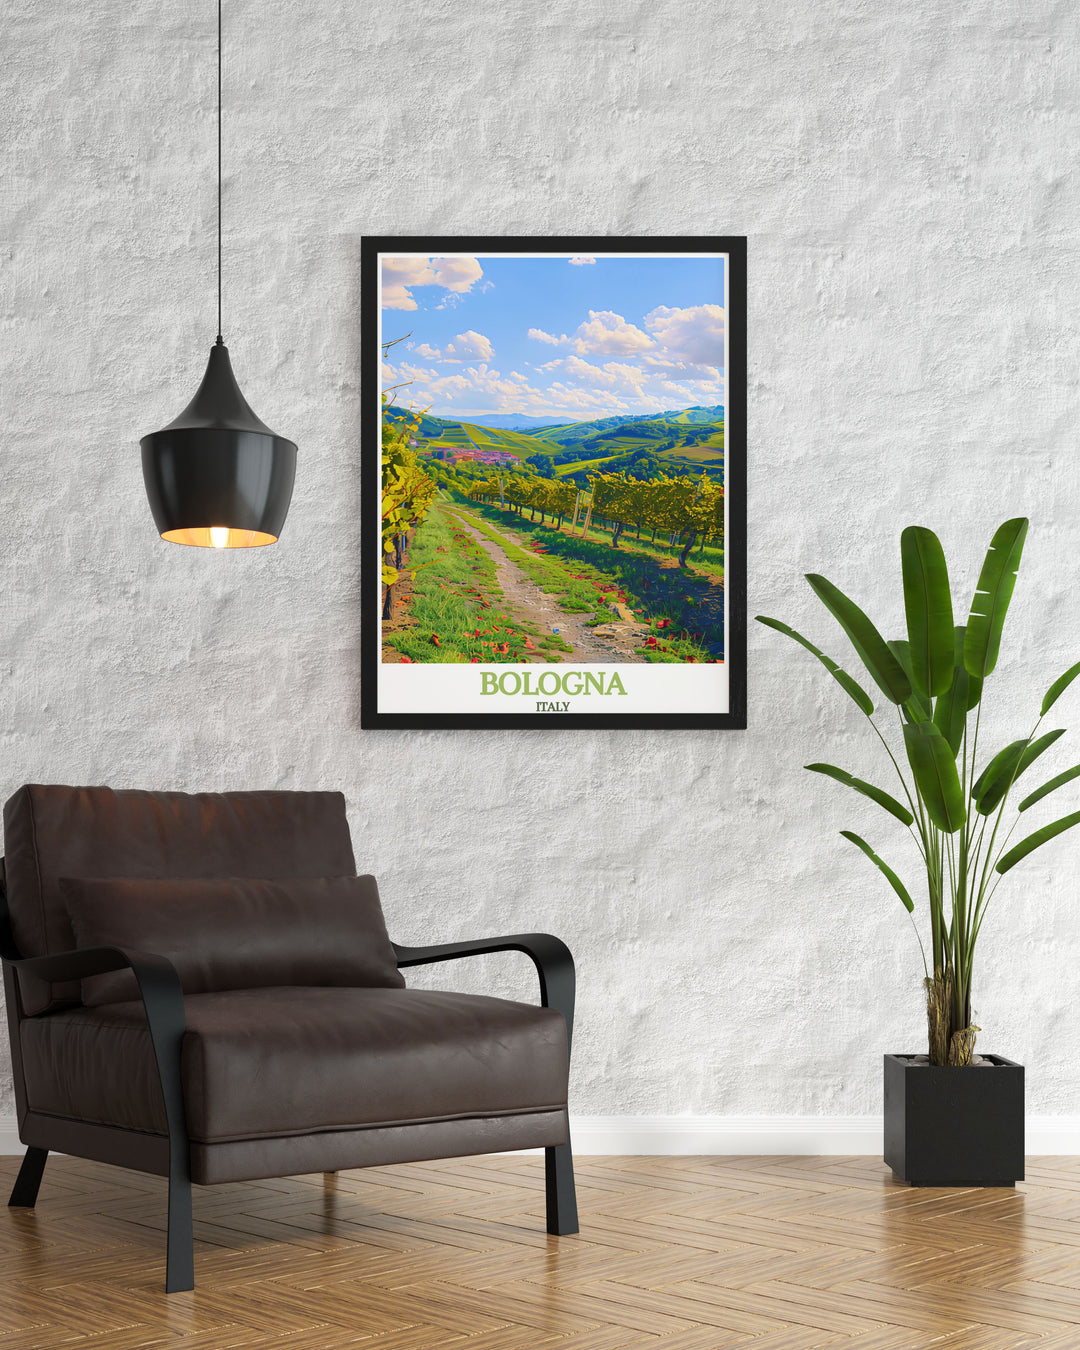 Elegant Bologna wall art depicting the Two Towers and the scenic Colli Bolognesi, showcasing the citys urban charm and rural tranquility. Perfect for adding sophistication to any room.